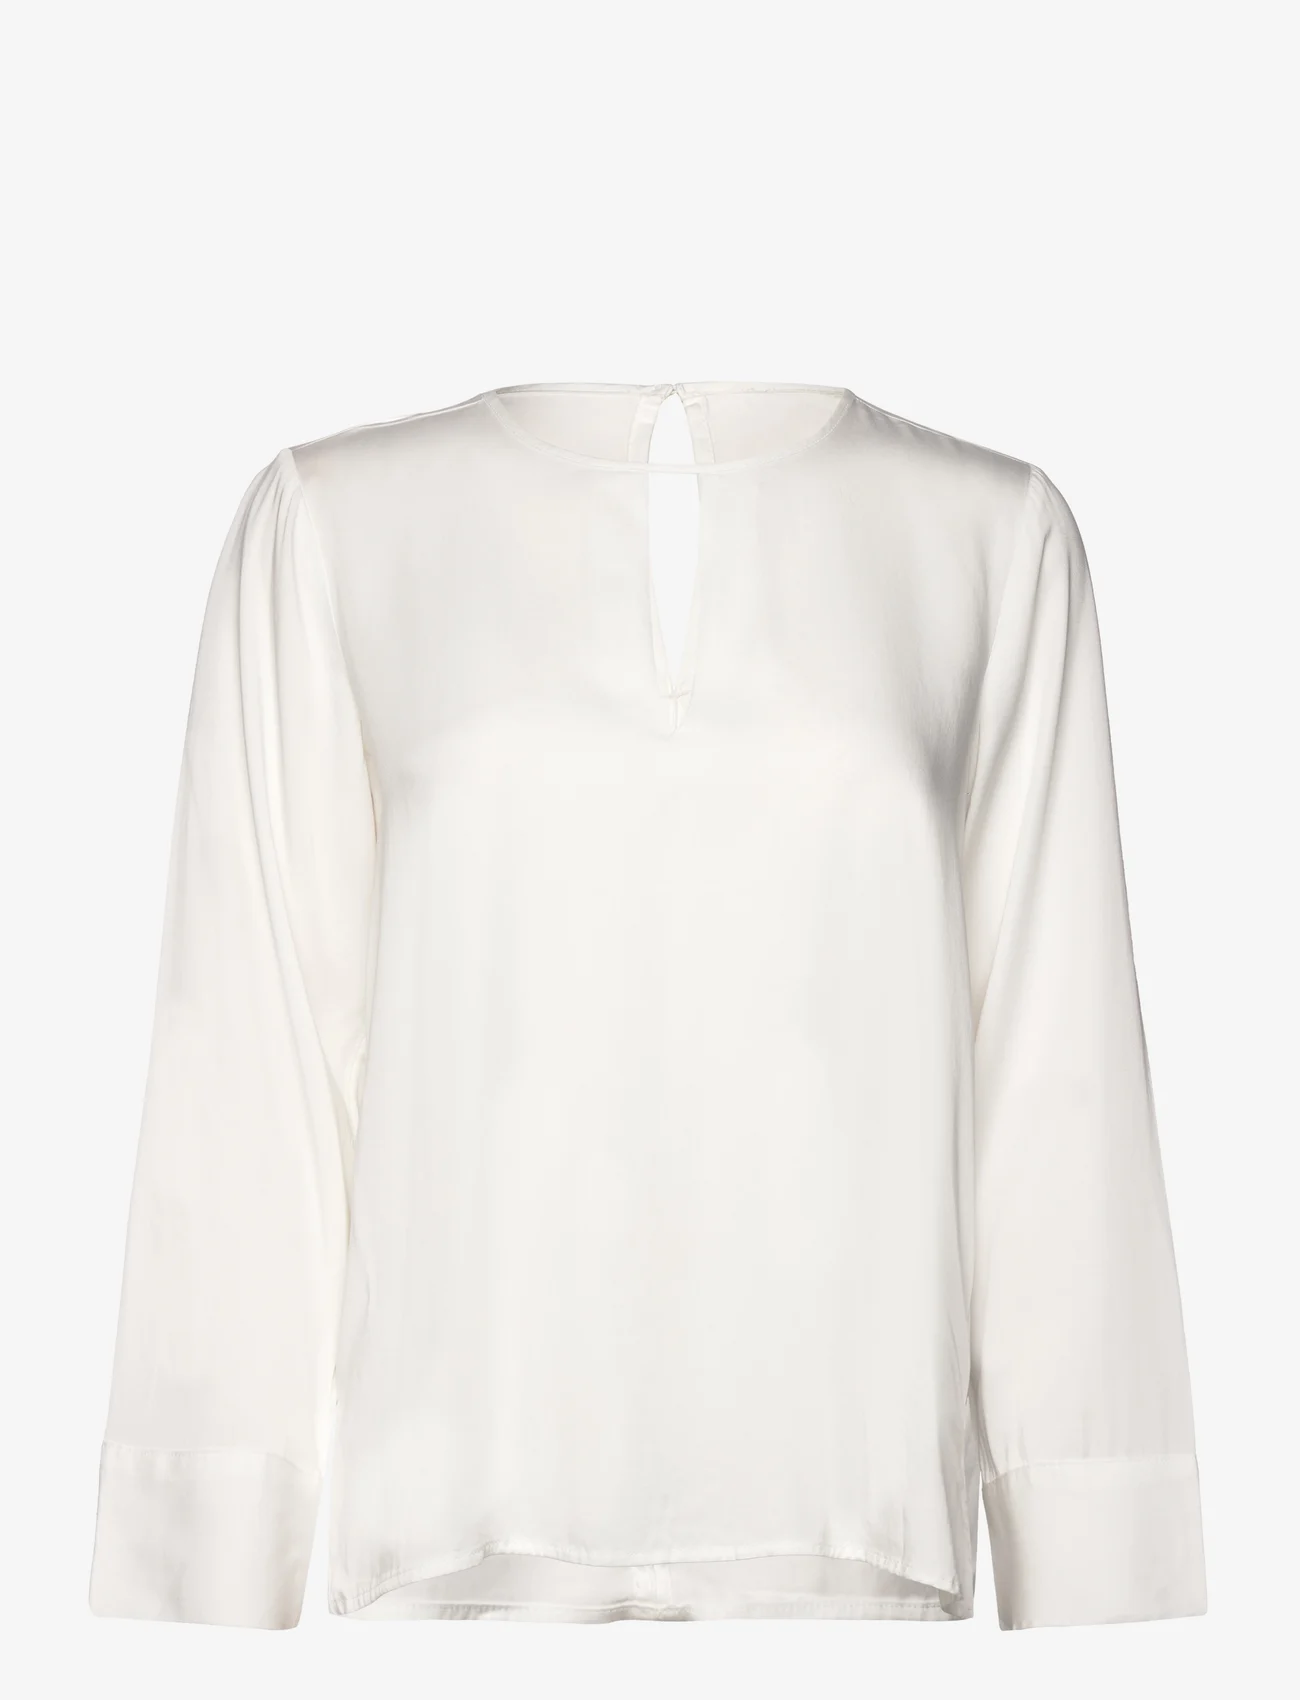 Tom Tailor - blouse with cut-out detail - langærmede bluser - whisper white - 0